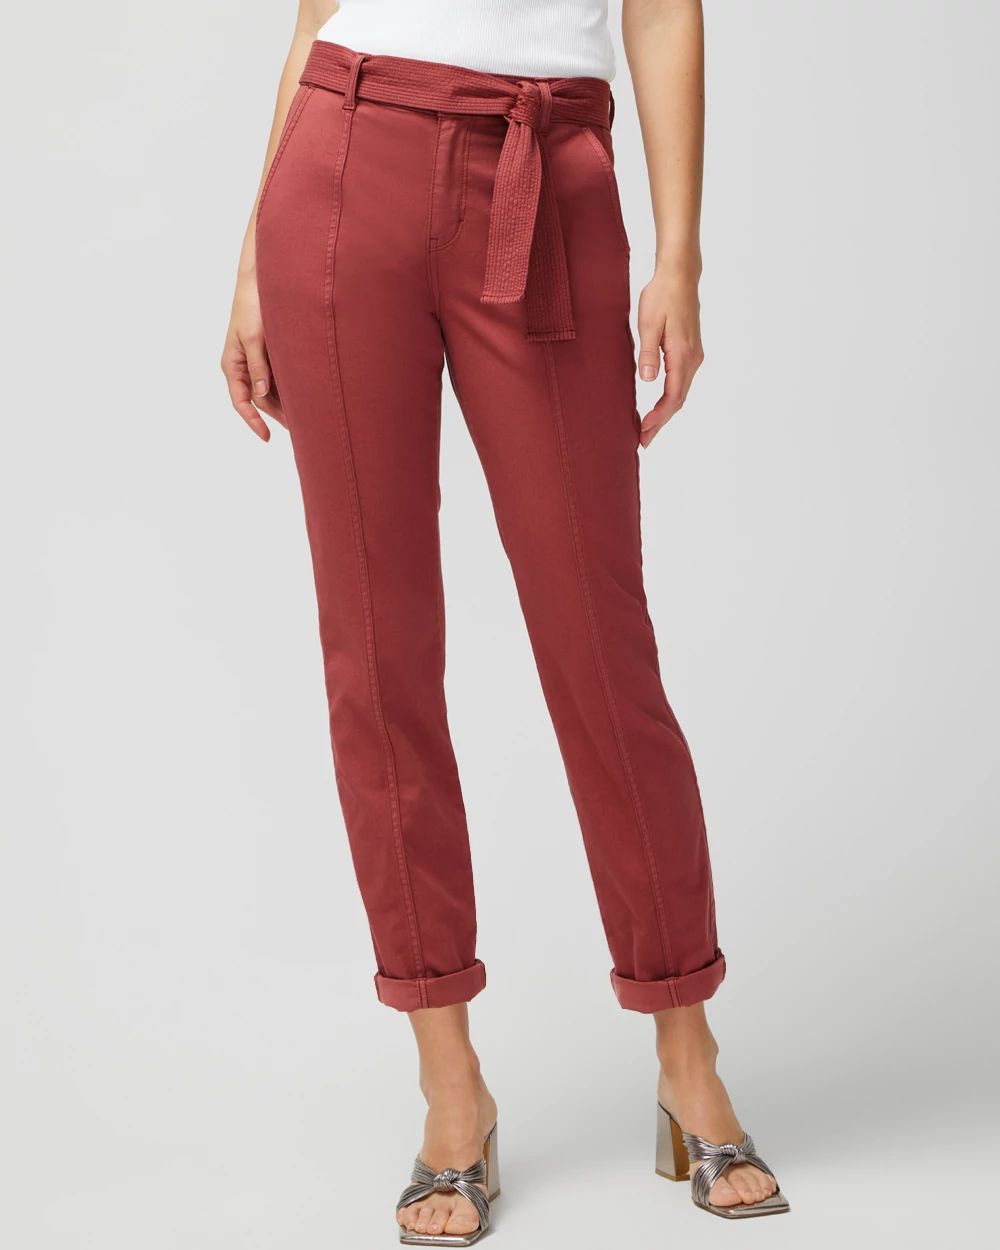 Pret High-Rise Belted Straight Cropped Pant click to view larger image.